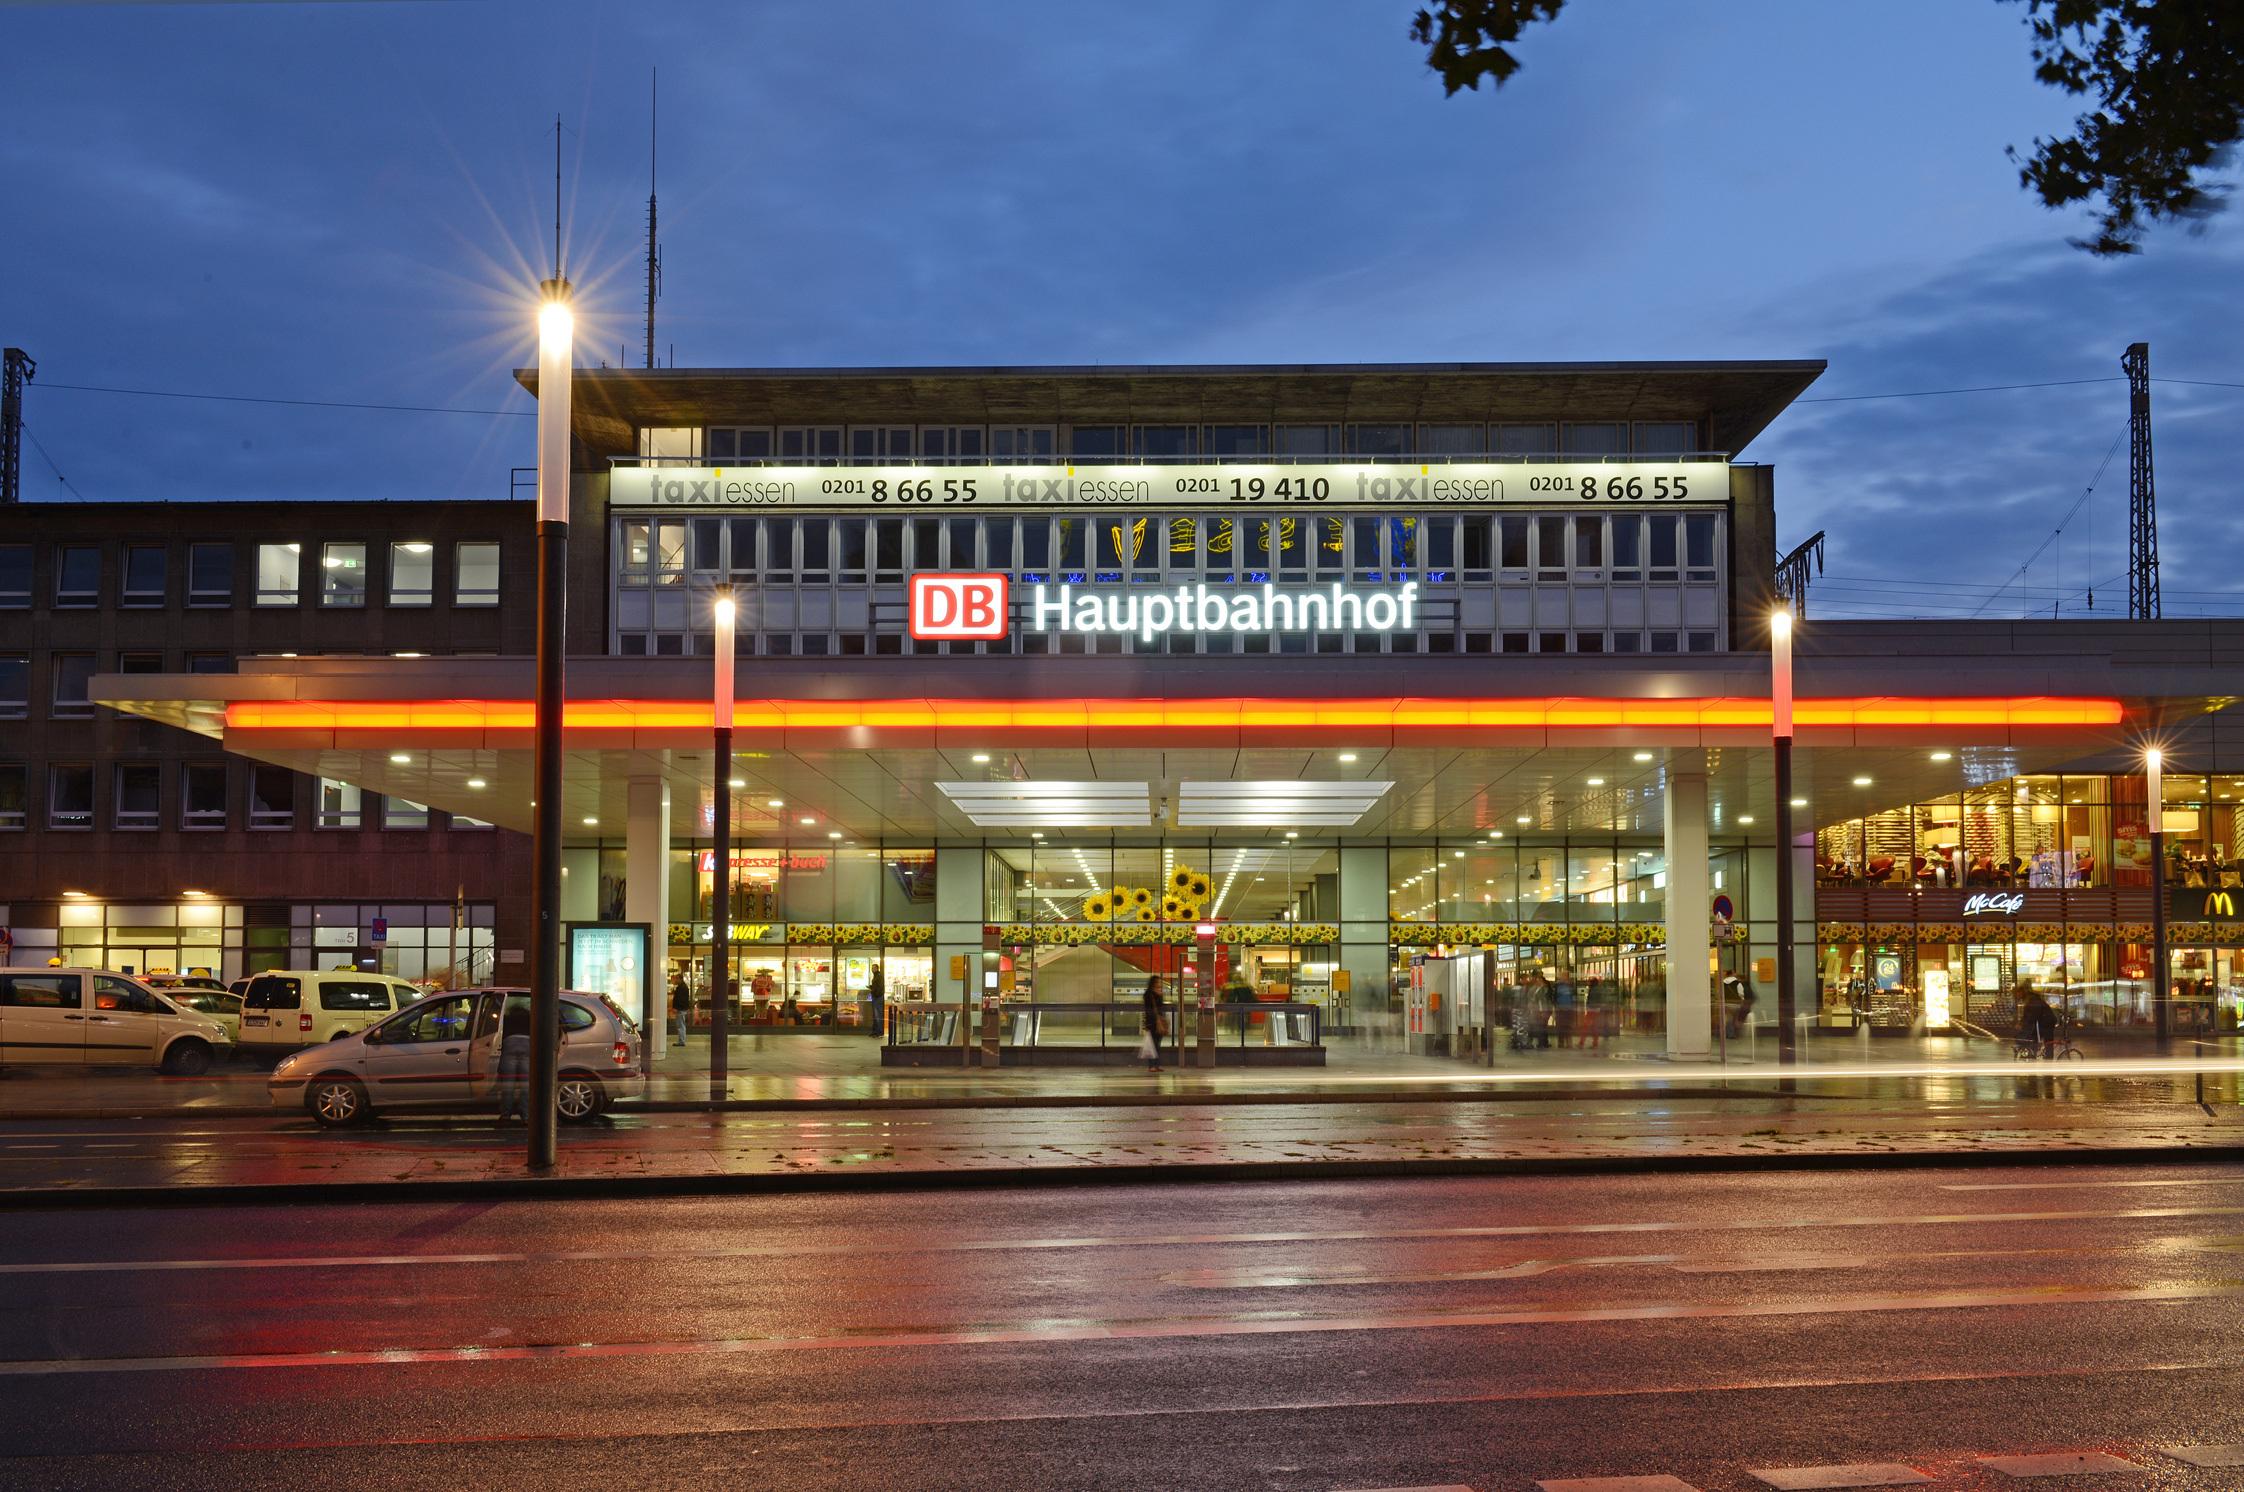 The view from the street towards the station building of Essen Hauptbahnhof at night.